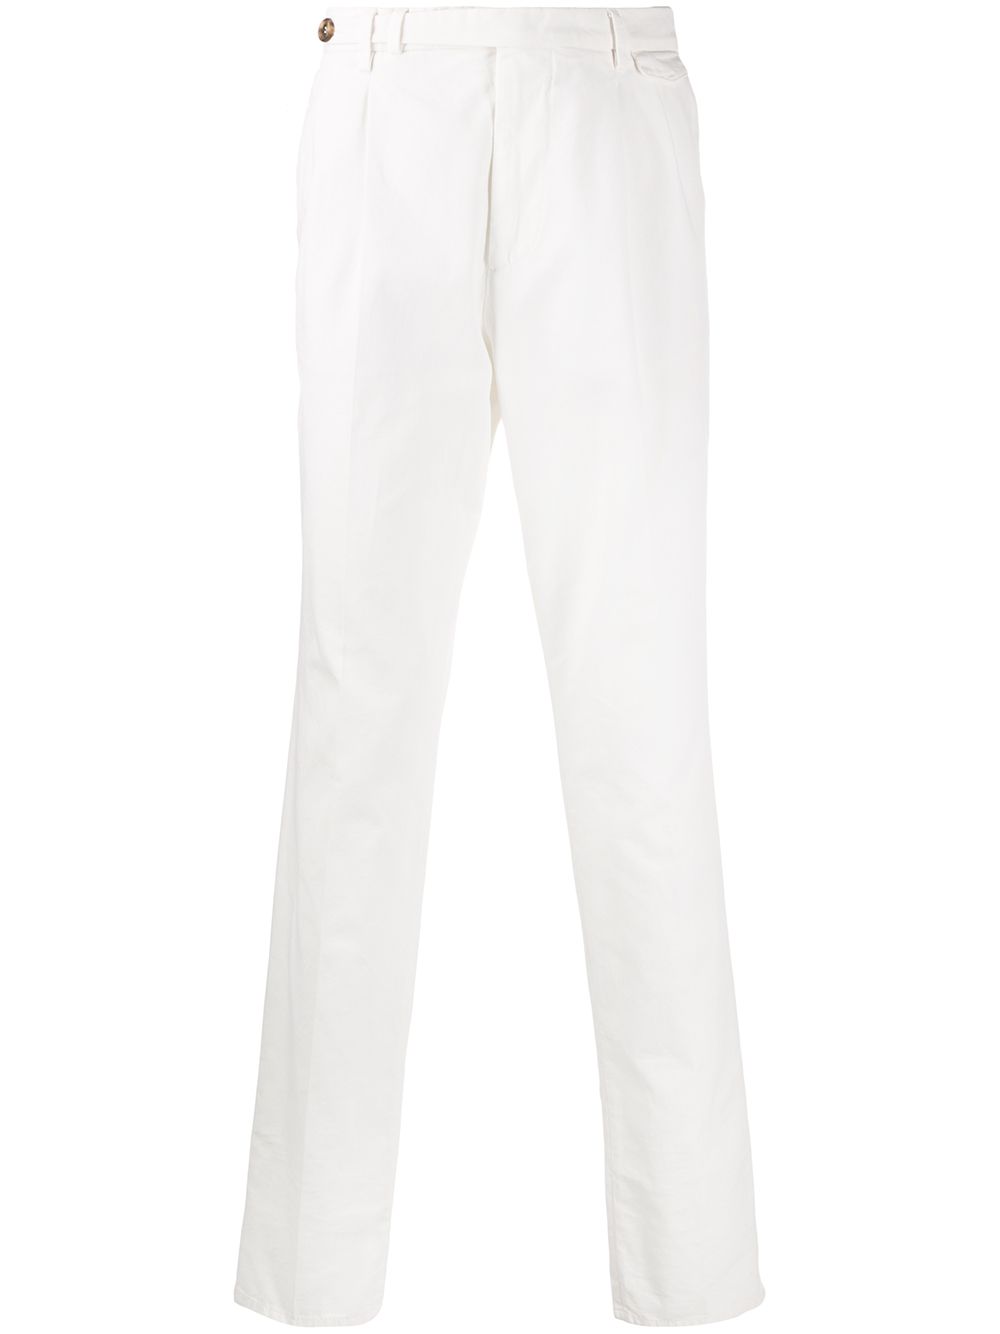 Shop Brunello Cucinelli colour block chinos with Express Delivery ...